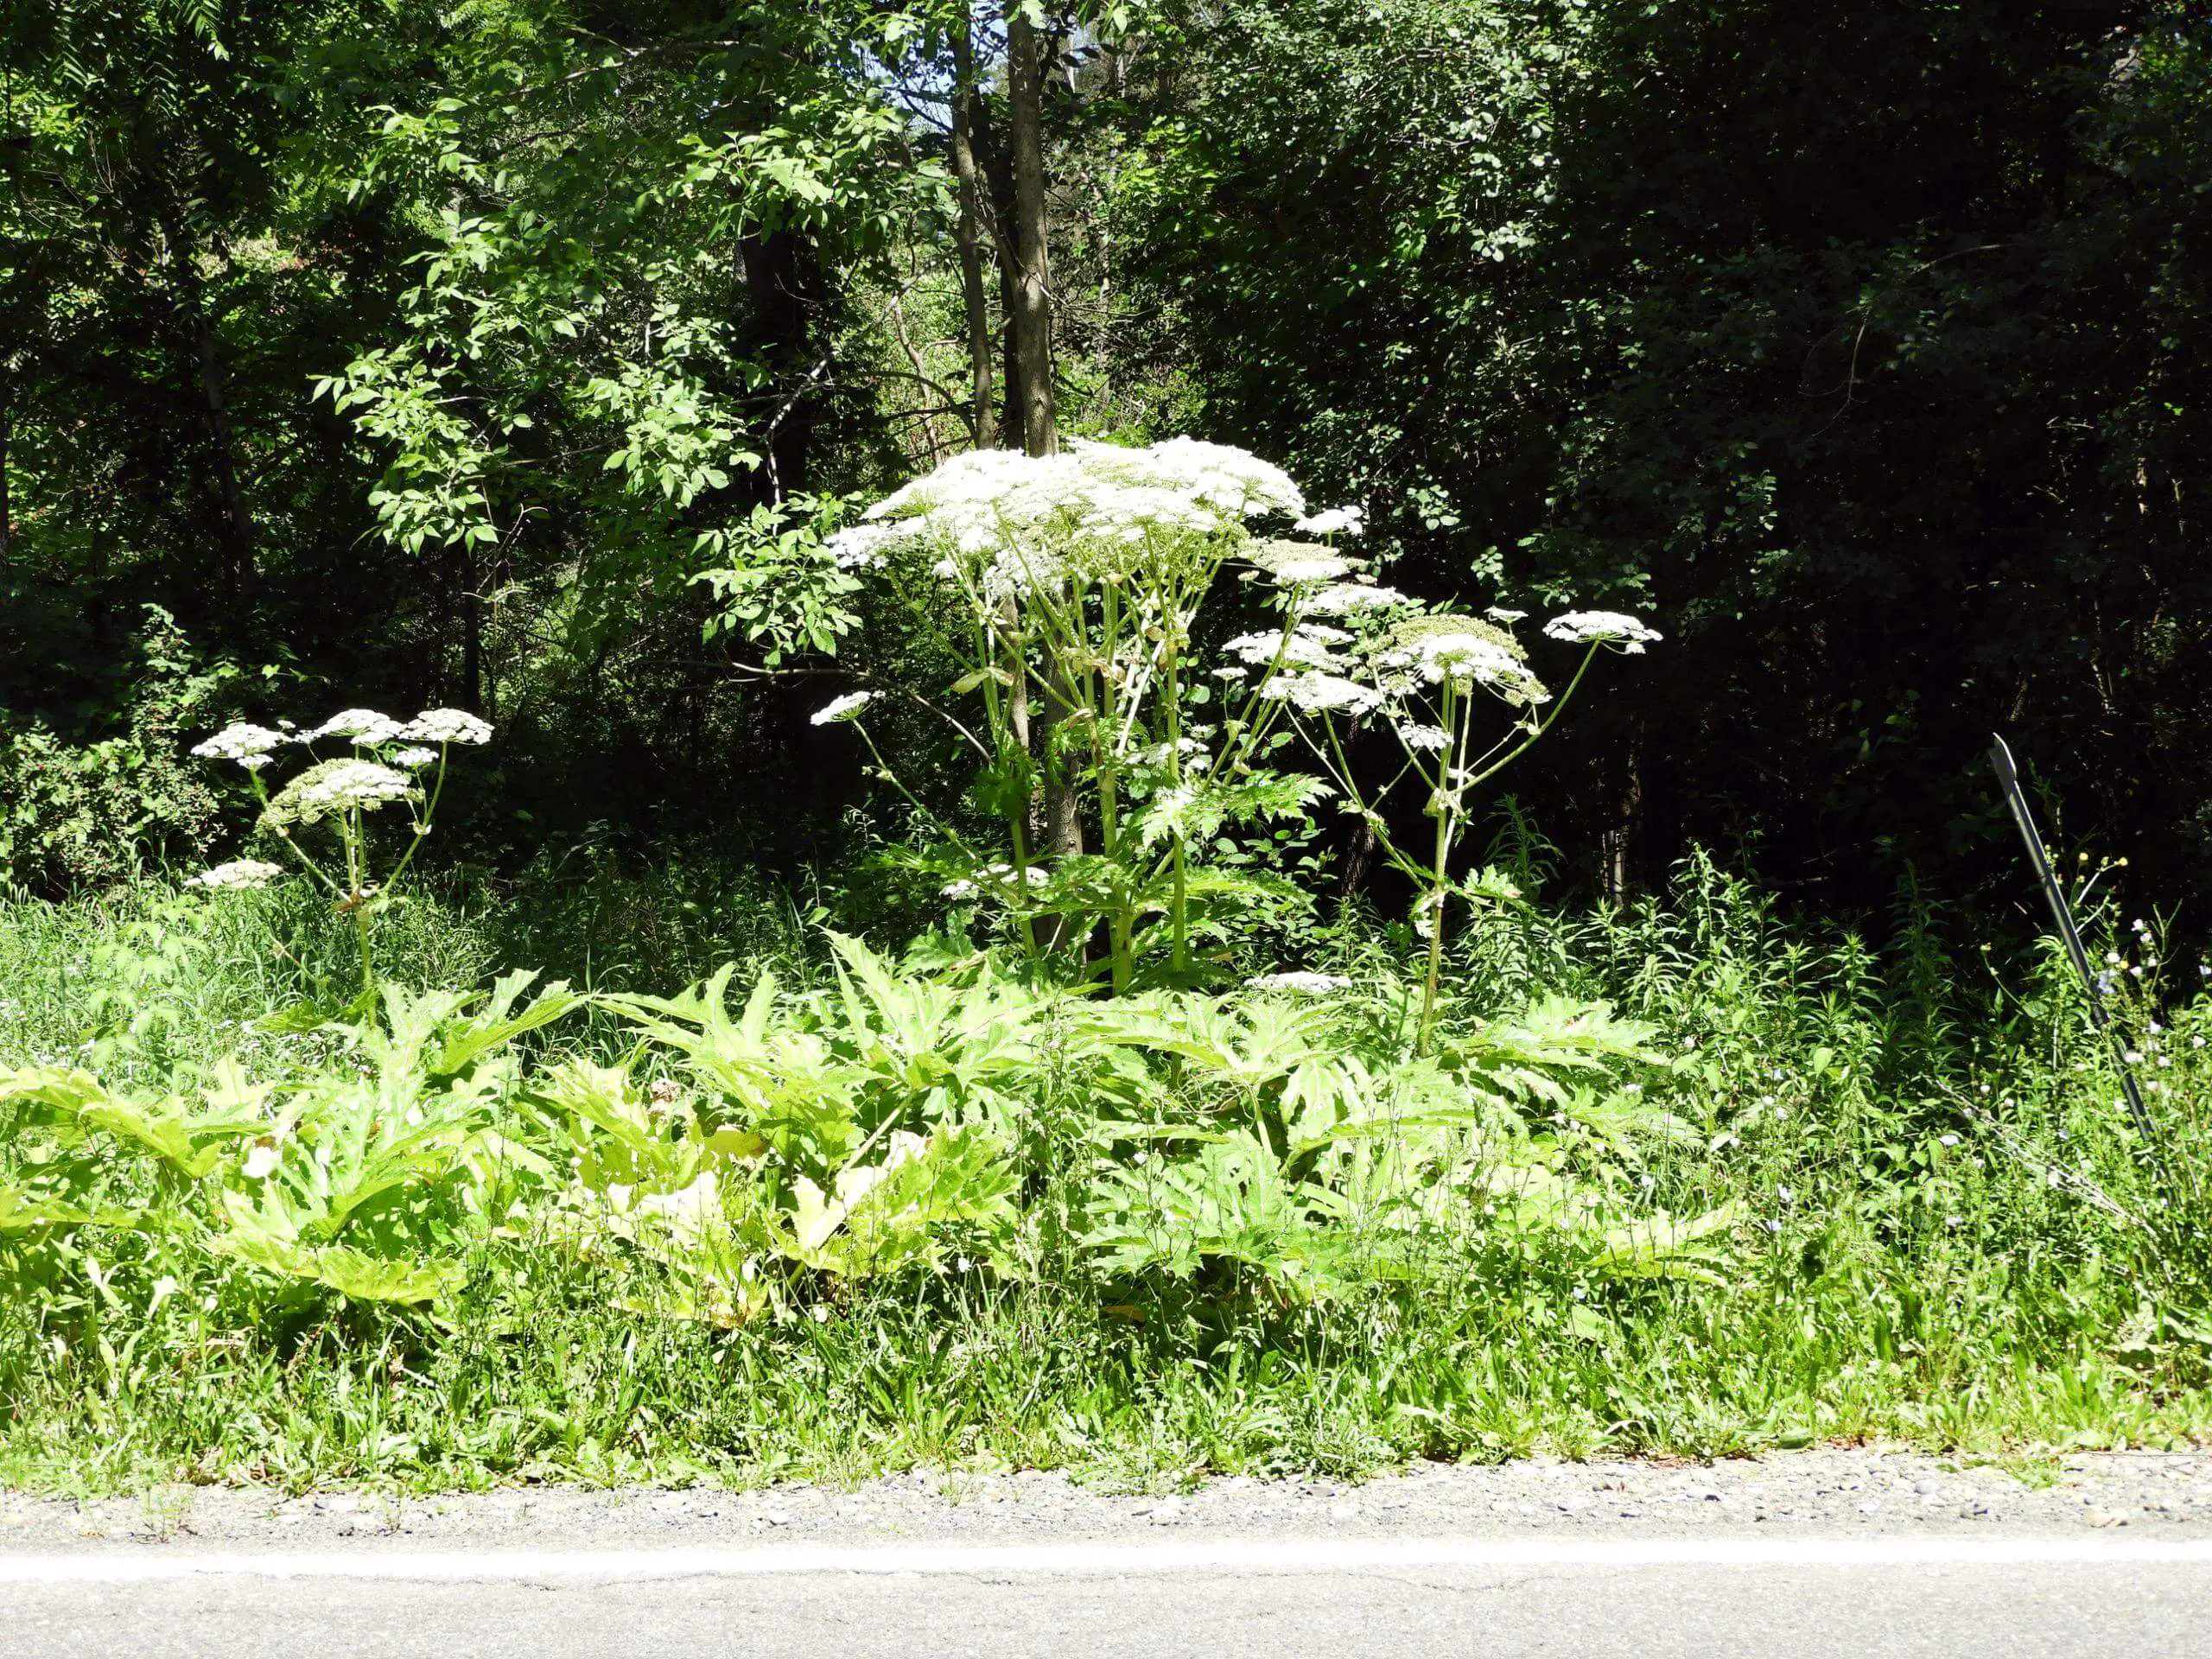 Giant Hogweed growing alongside a road and typically in ditches